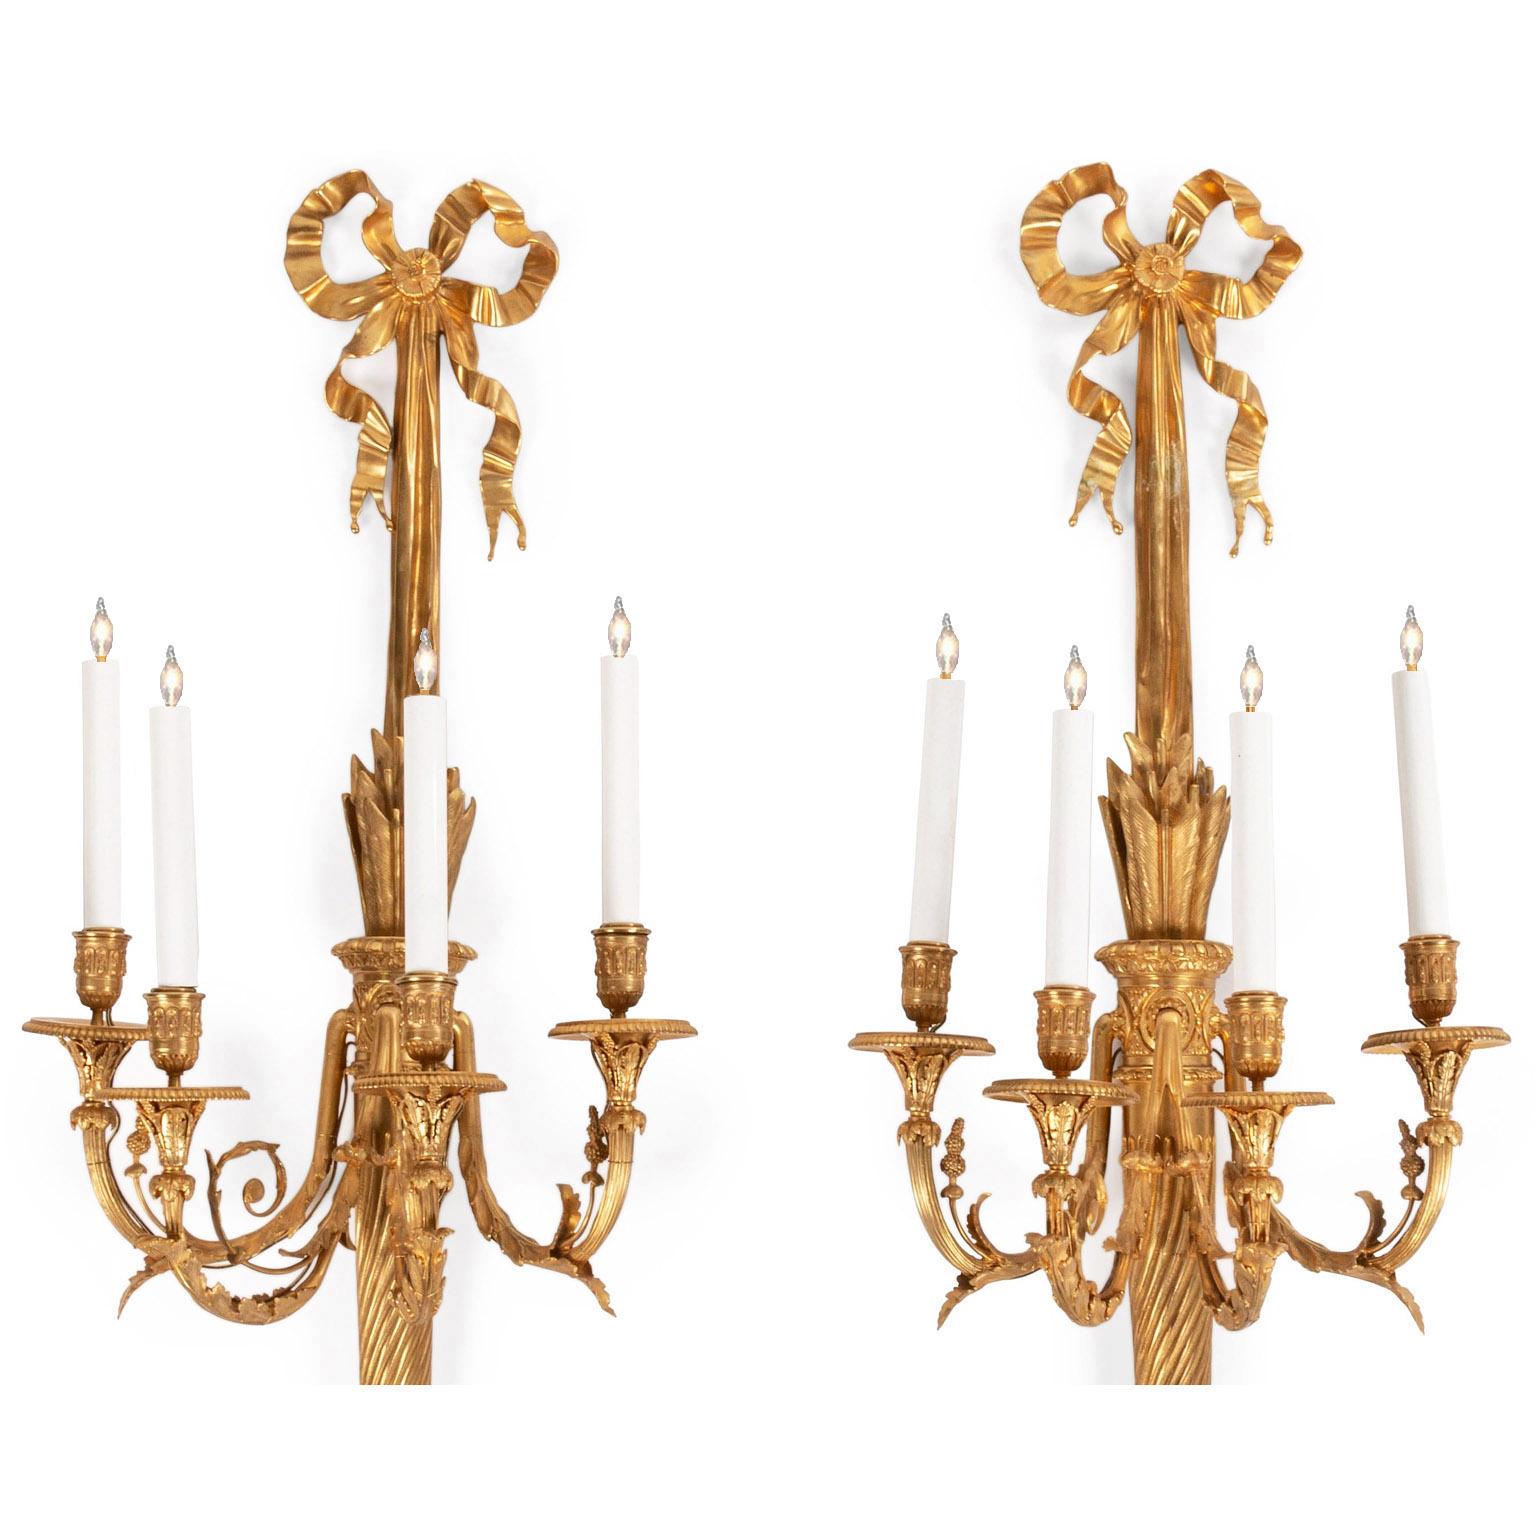 A fine pair of French 19th century Louis XVI style gilt bronze four-light wall sconces (Wall Lights). The back plate in the form of a torch with four scrolled candle arms protruding from the center frame, each decorated acanthus leaves and acorns